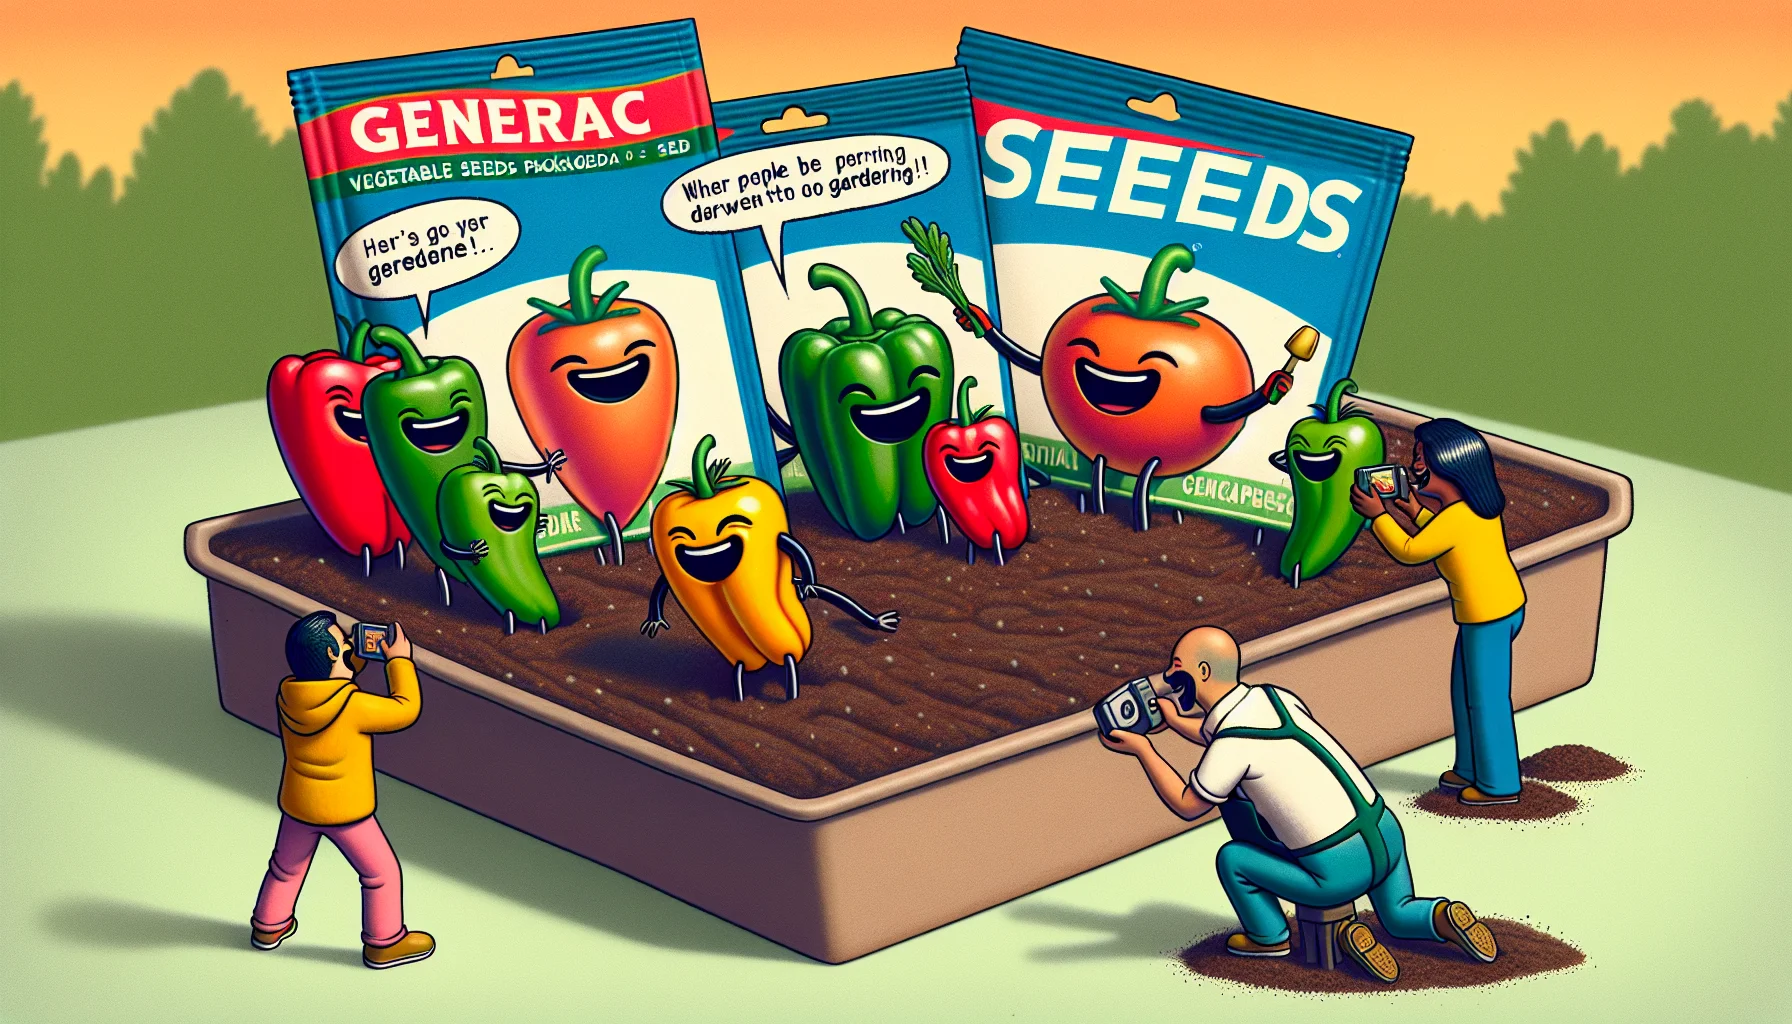 Create an image that showcases a comical scene involving generic vegetable seeds packaged by a well-known gardening company where people are drawn to gardening. The seeds are packaged in colorful envelopes, each one bearing an image representing the vegetable it contains. In this humorous scenario, the vegetables themselves are depicted as characters - tiny, vibrant avatars of peppers, tomatoes, and bell peppers, having a jovial conversation over potting soil as if they are about to plant themselves. The humans responsible for the garden - a cheerful Hispanic man and an equally enthusiastic Caucasian woman - are capturing this magical scenario, their expressions mirror the joy of gardening.